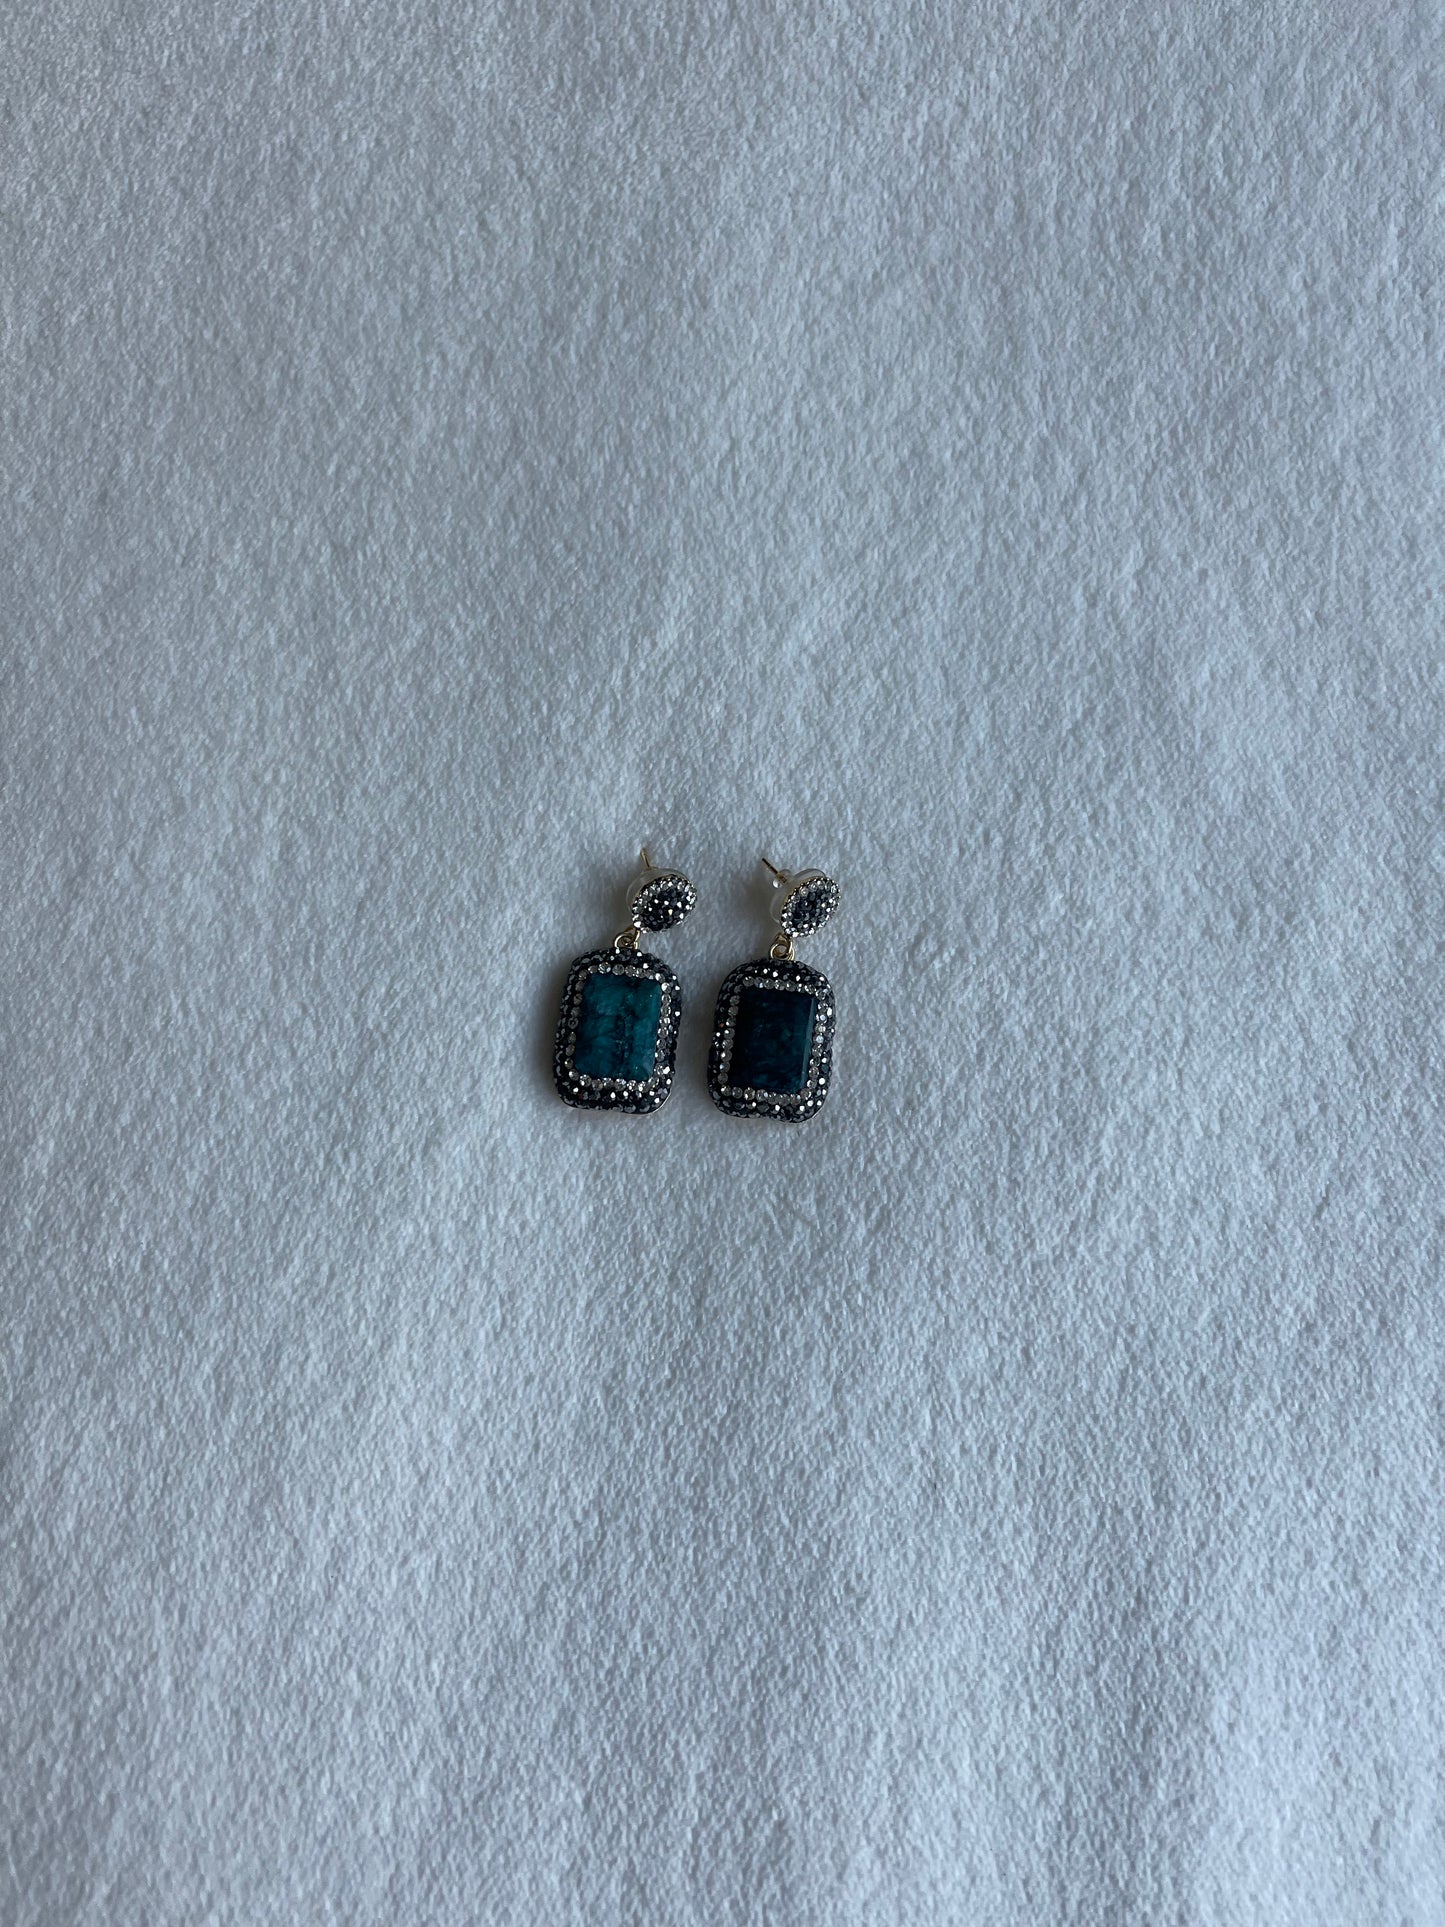 Silver Tone Earring with Turquoise